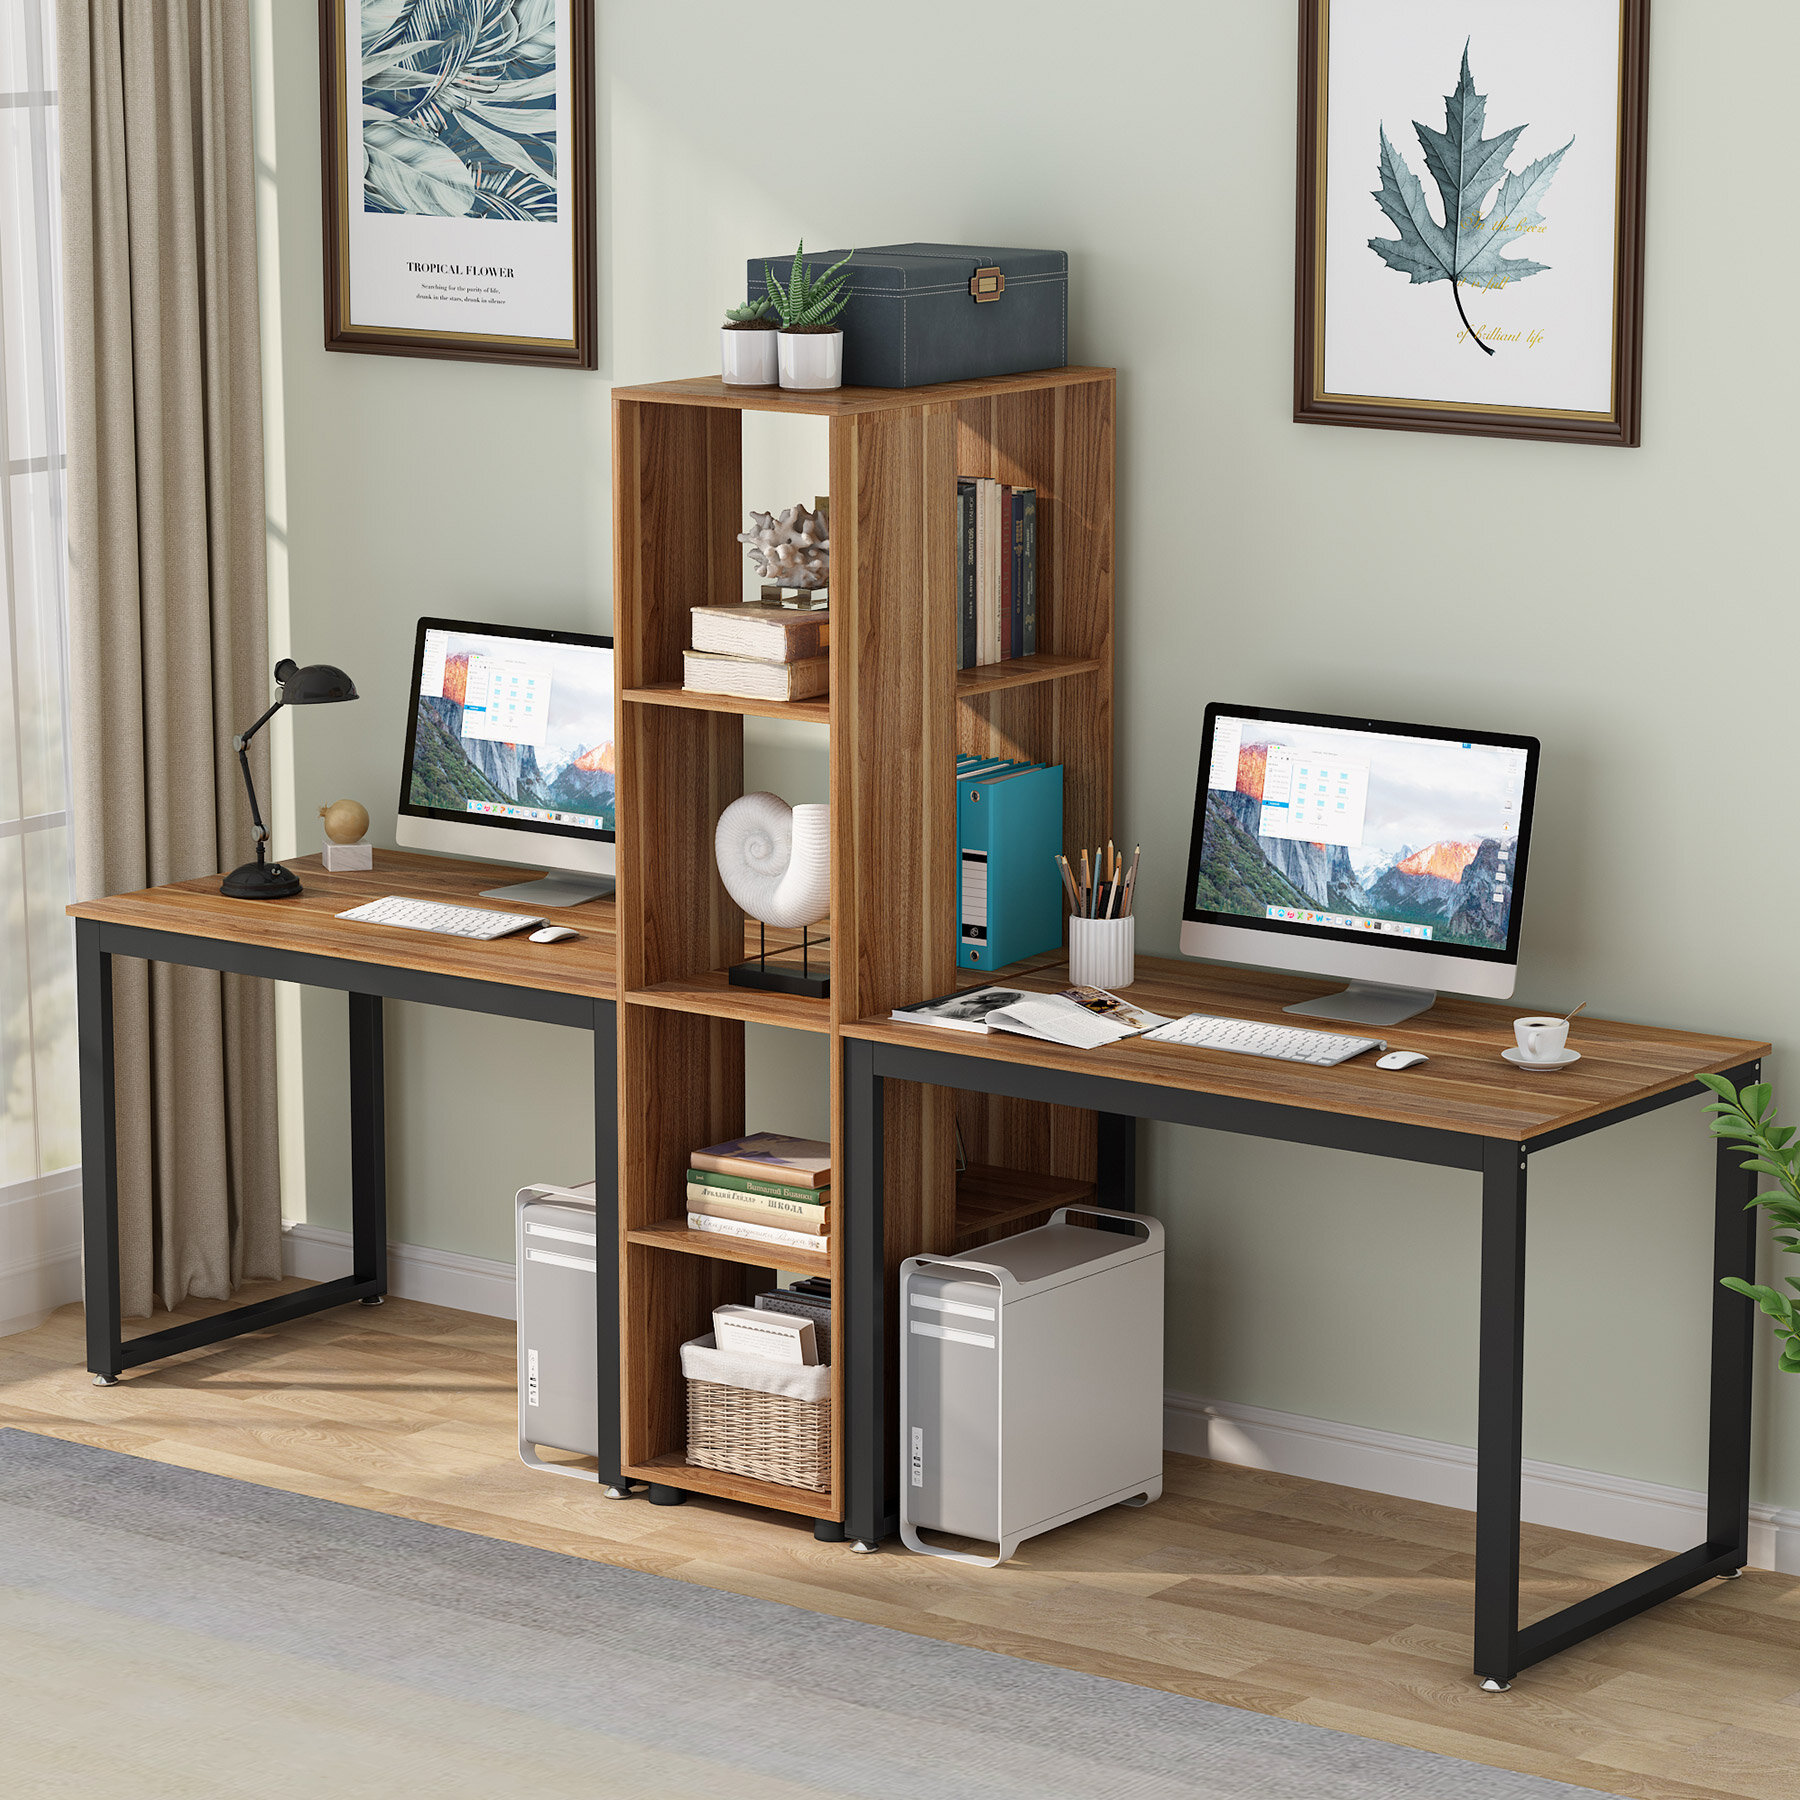 TribeSigns 94.5 Inches Two Person Desk with Storage Hutch Shelf